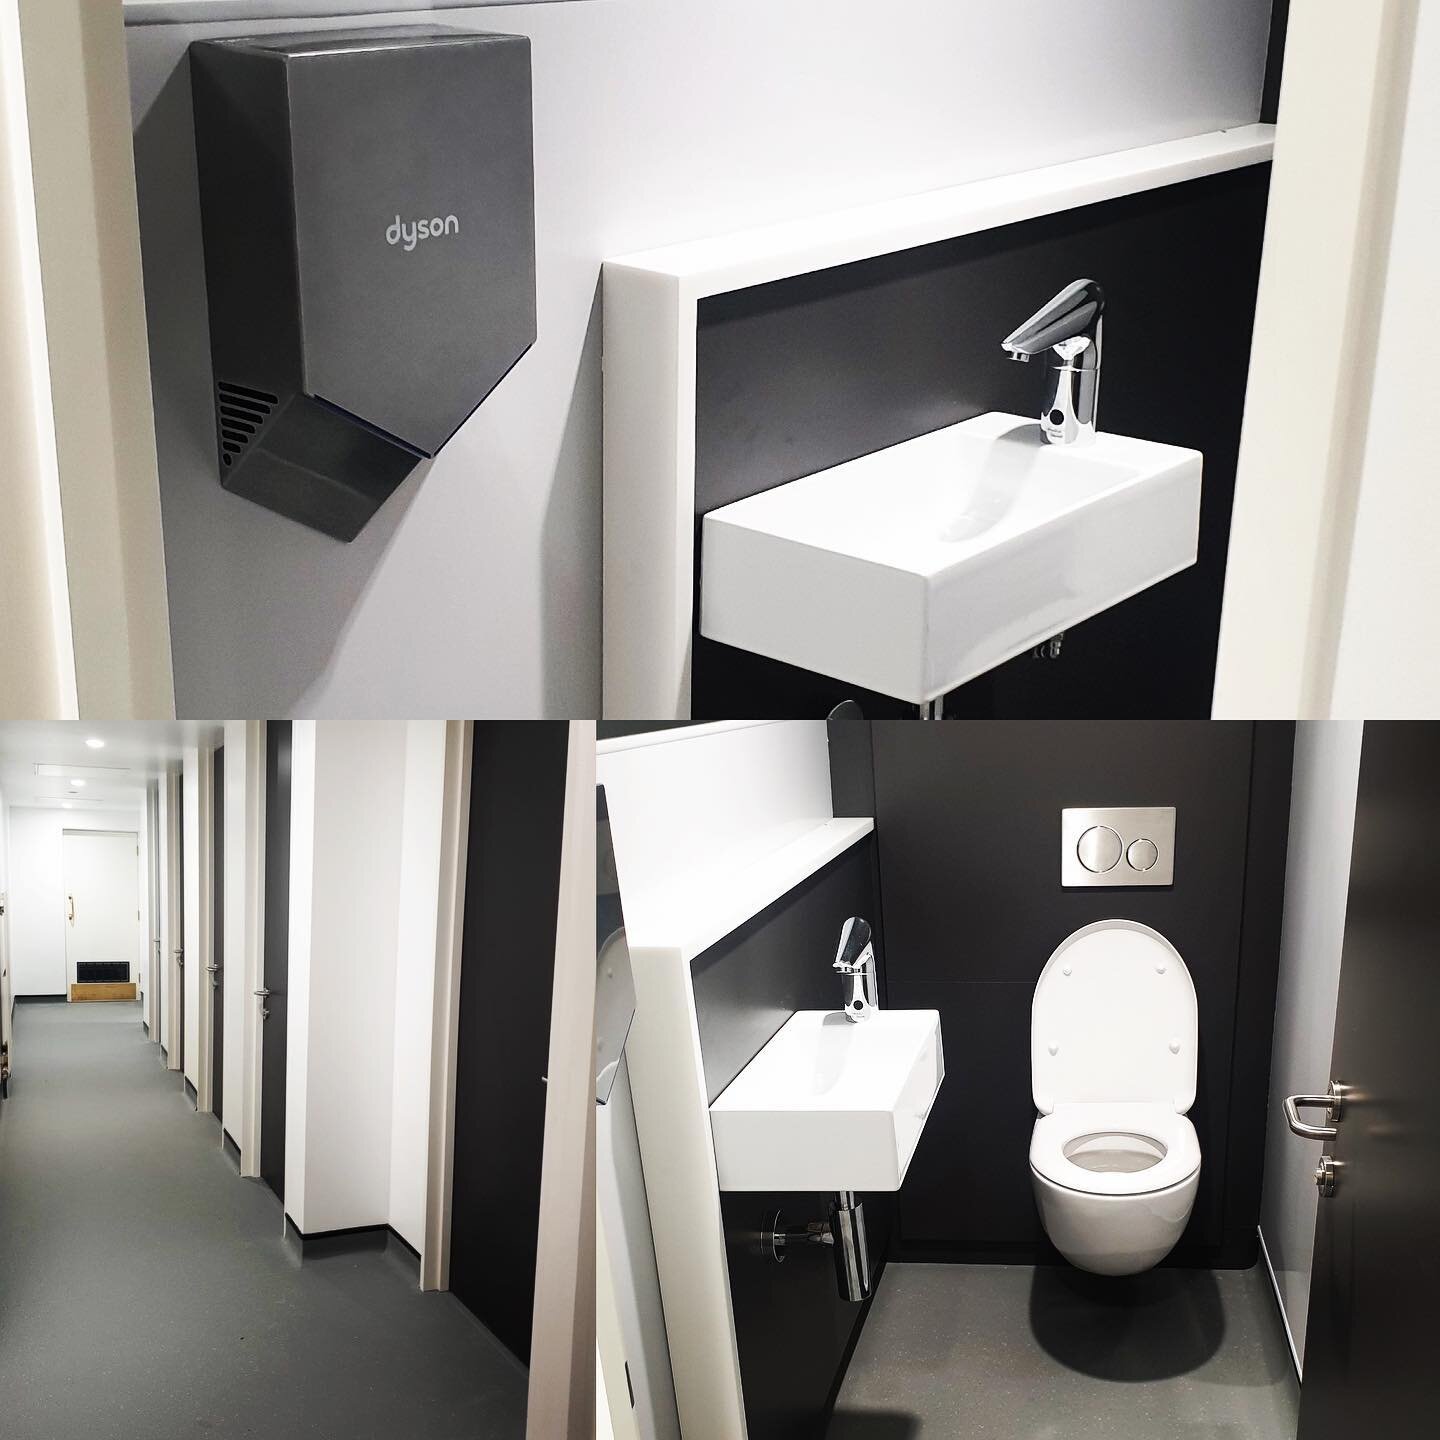 It&rsquo;s not always about the glamorous jobs! New bathroom fit out within a large listed building. Thanks @dyson #projectmanagement #consultancyservices